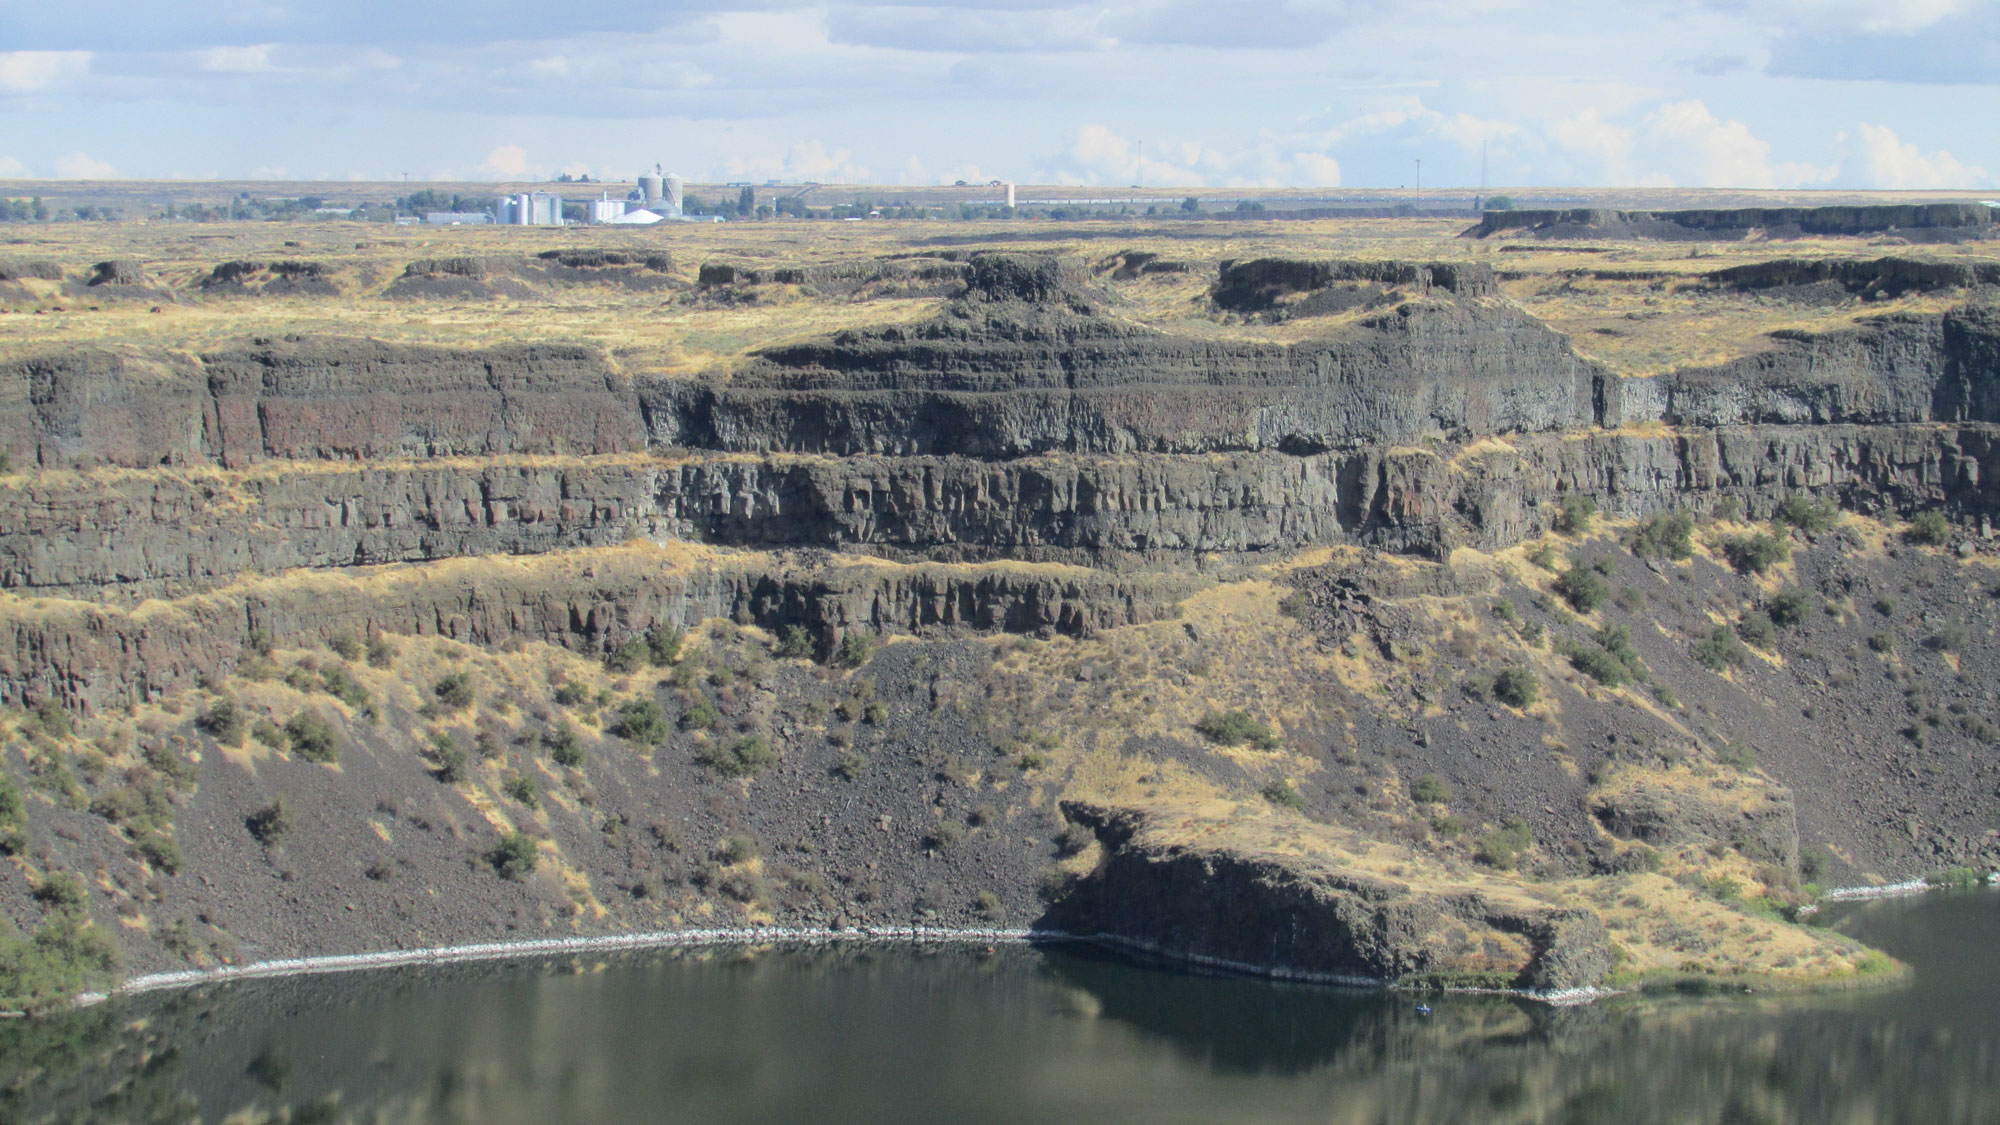 Photograph of basalt layers exposed surrounding Dry Falls Lake in Washington. The photo shows a tiered cliff at the edge of a lake. The cliff is made up of gray-brown rock with sparse yellow grass and green shrubs.